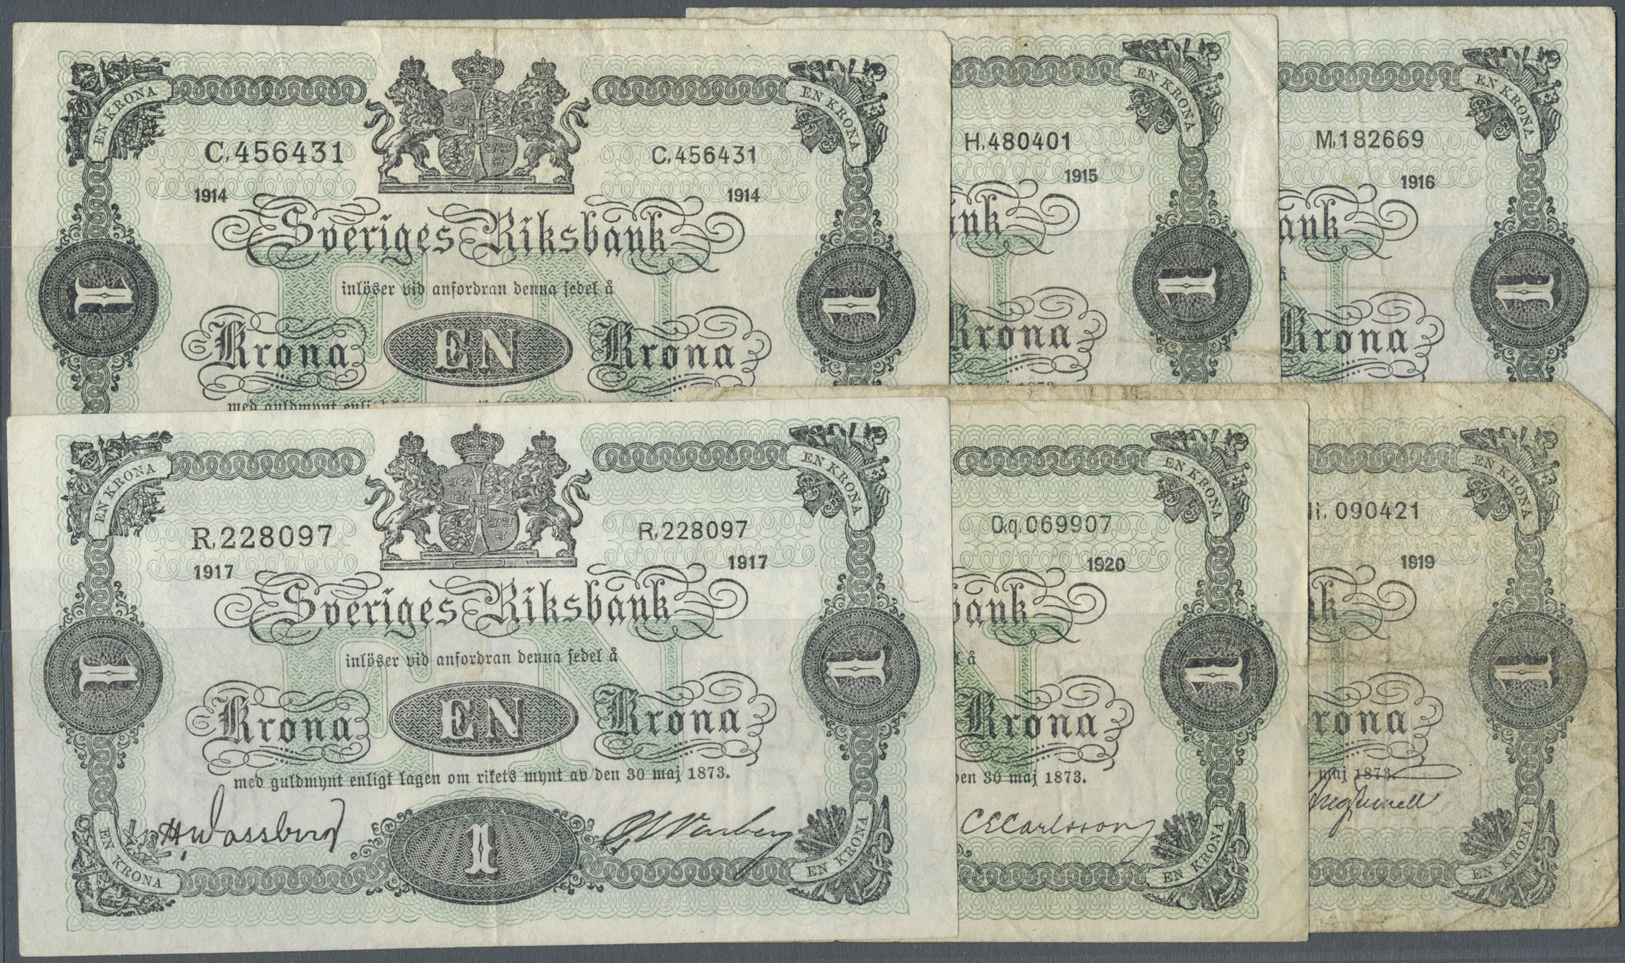 03050 Sweden / Schweden: Set Of 6 Banknotes 1 Korona P. 32, All With Different Dates; 1914, 1915, 1916, 1917, 1919 And 1 - Suède